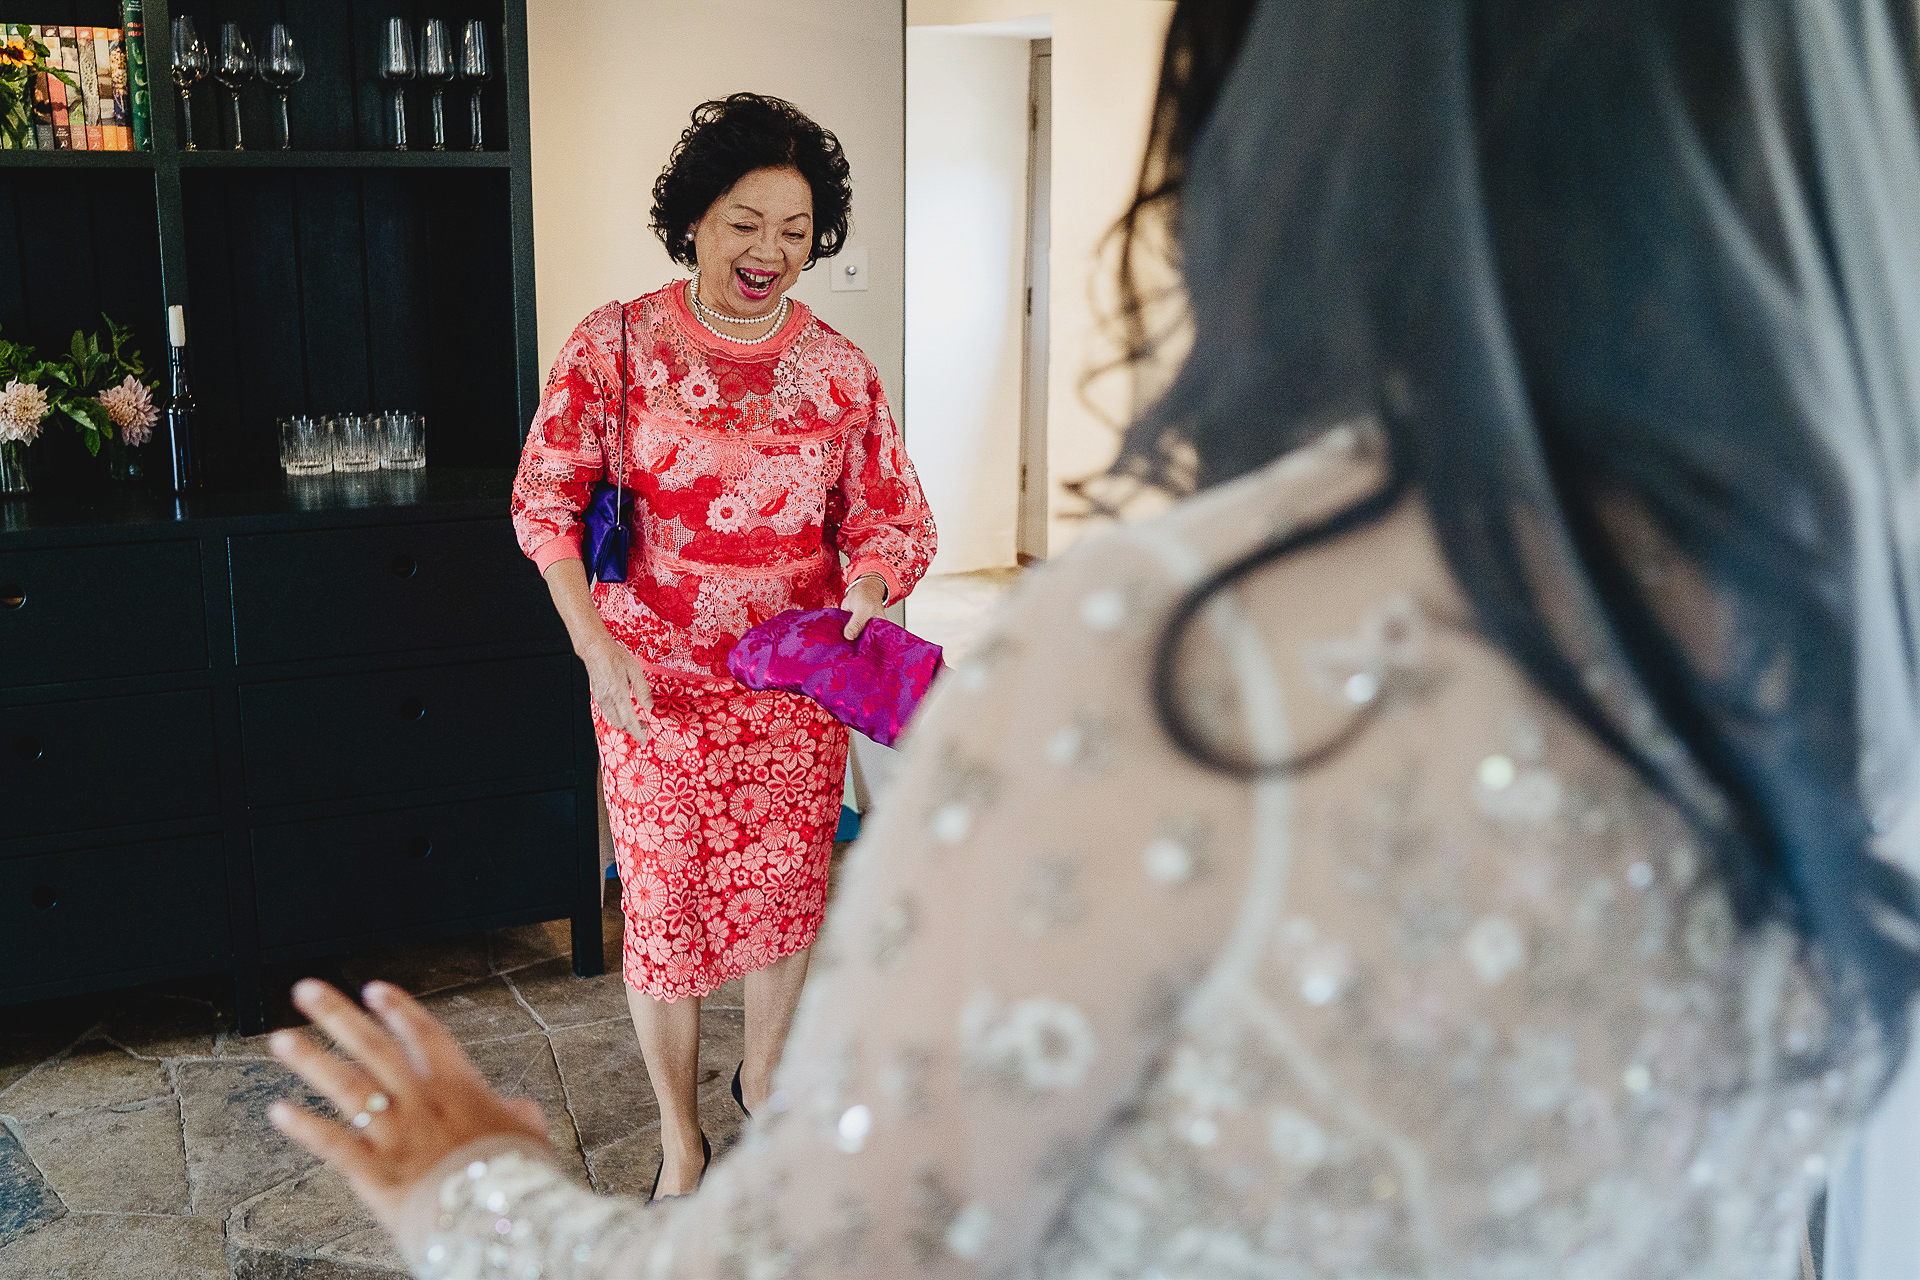 Mother of the bride smiling joyfully at bride in dress